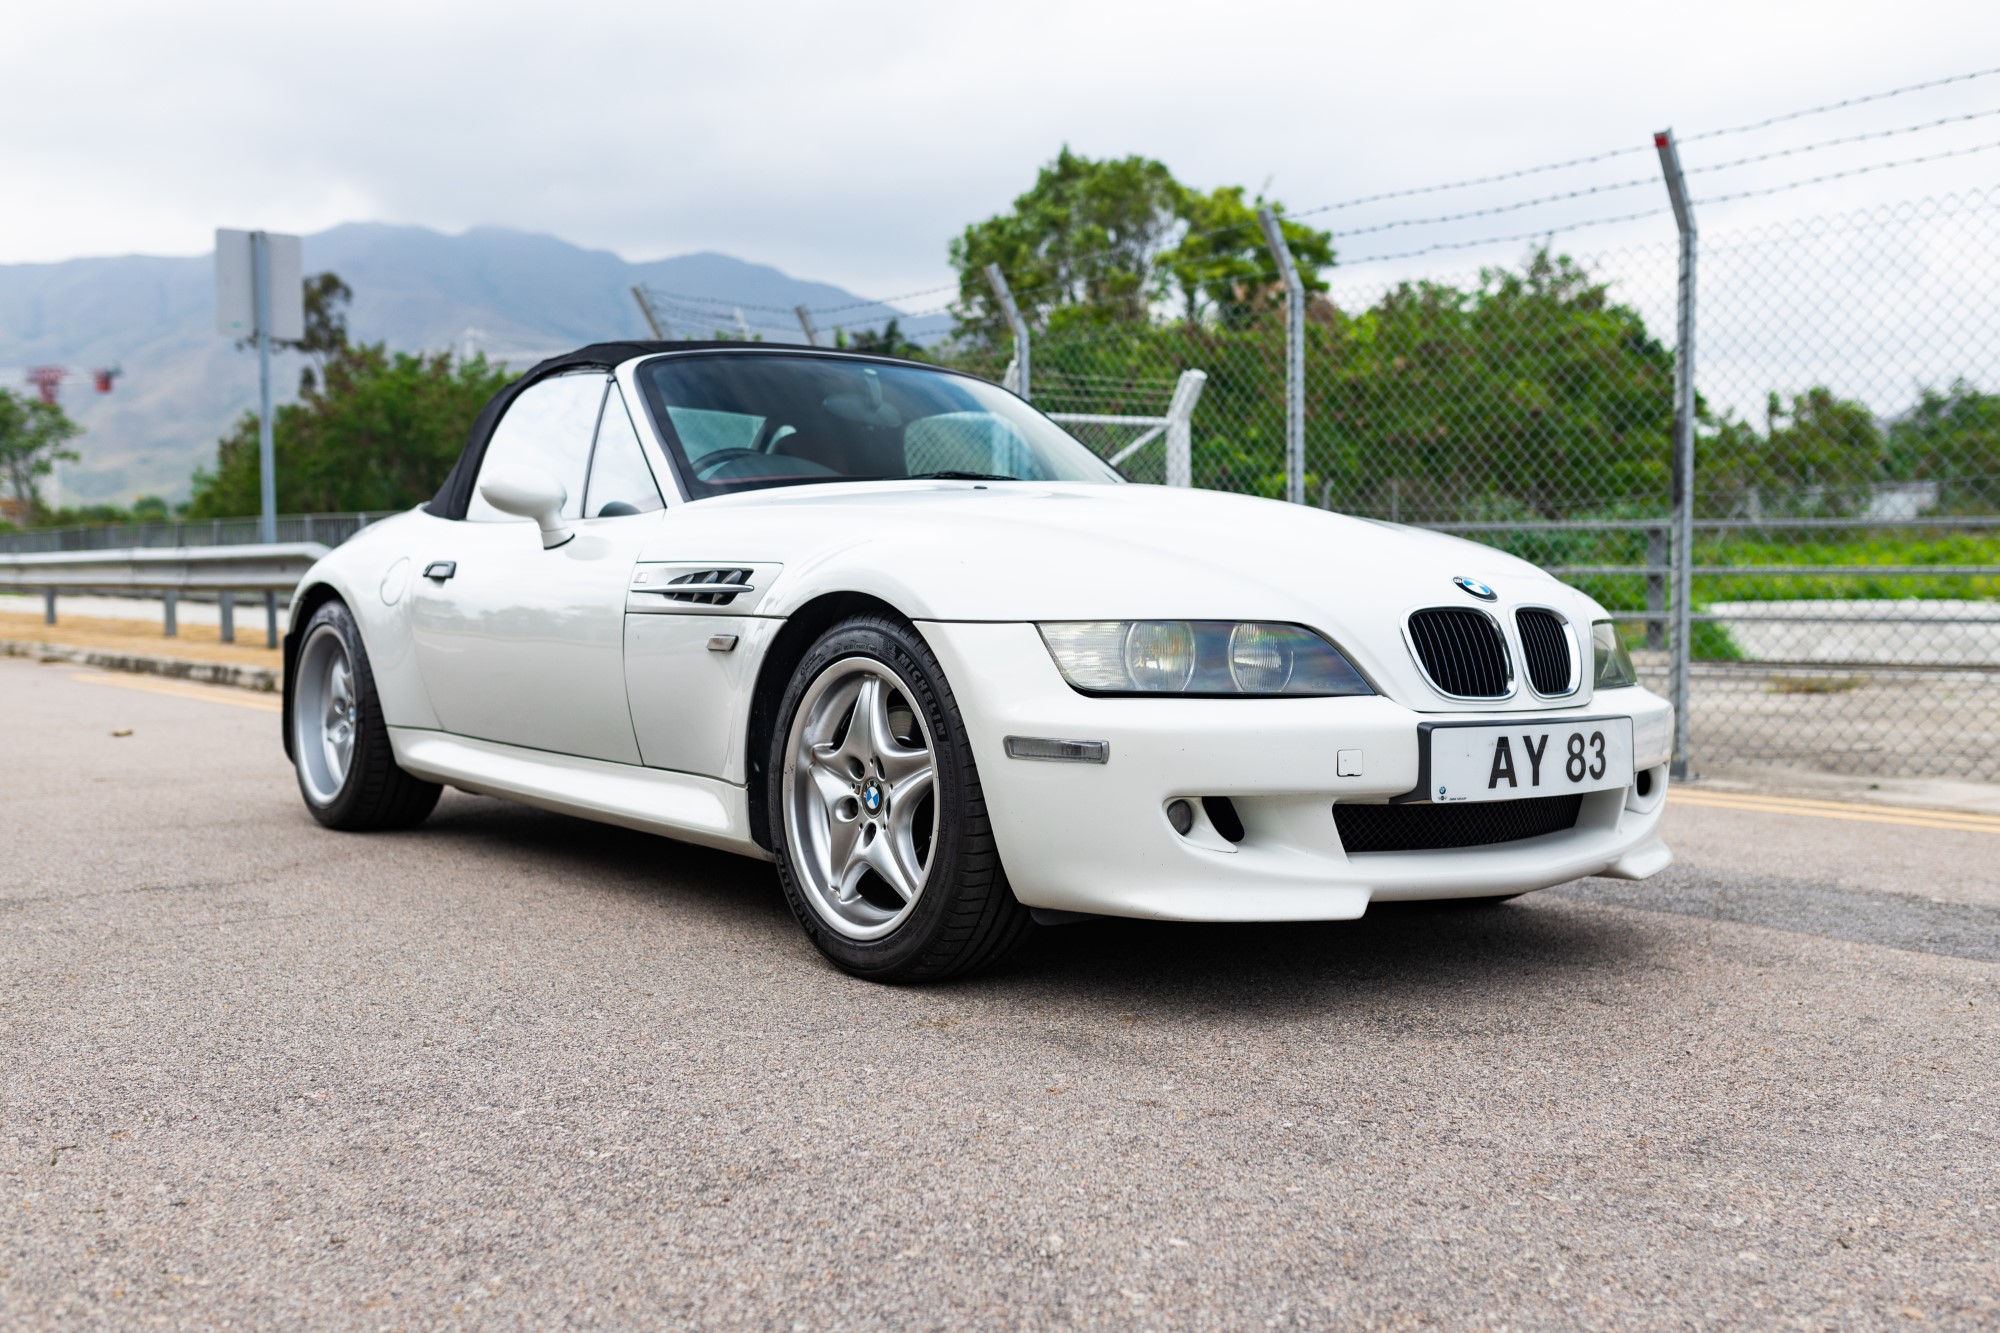 1998 BMW Z3 M ROADSTER for sale by auction in Yuen Long, Hong Kong